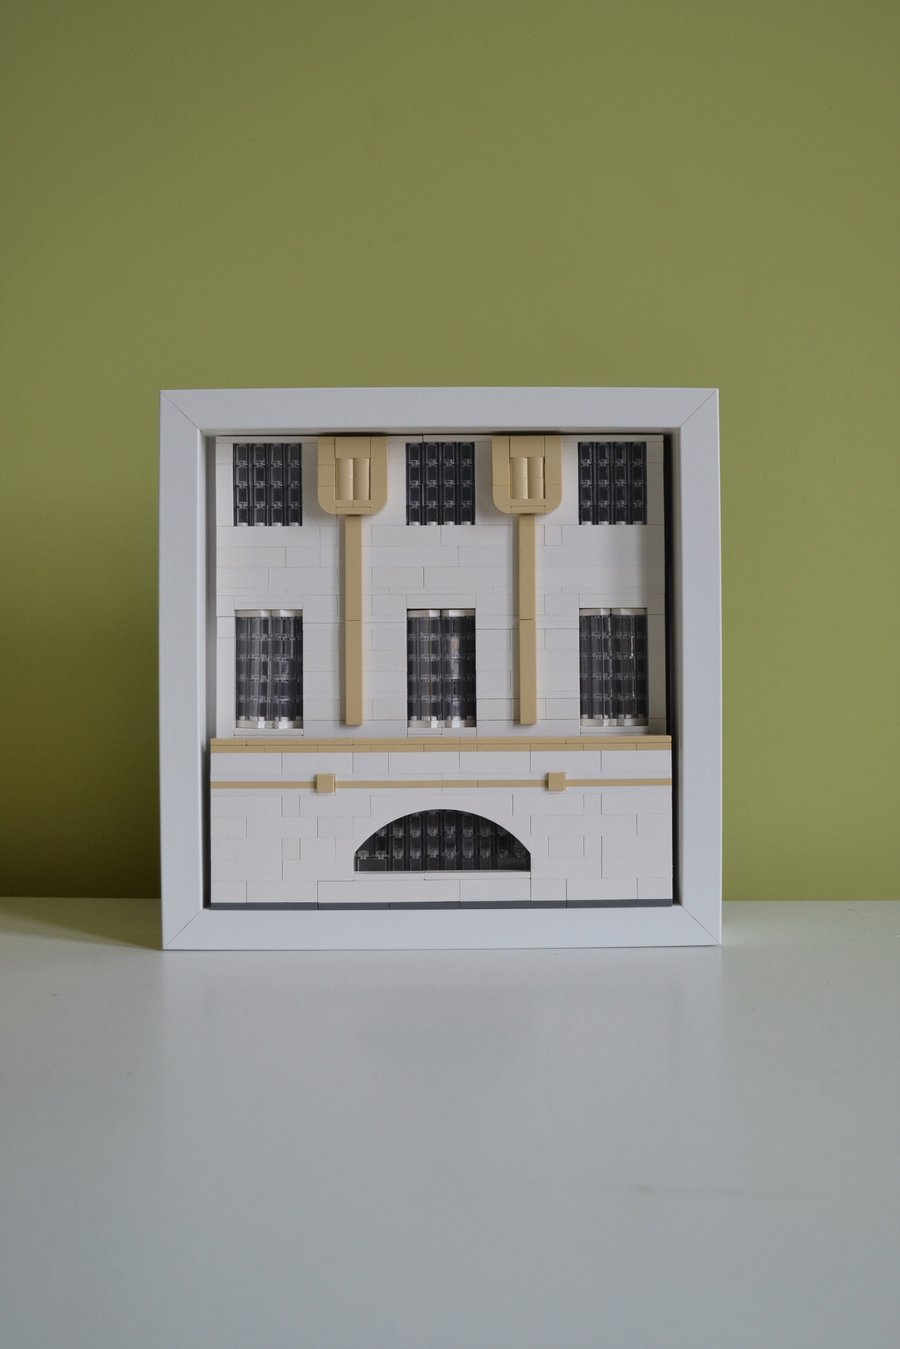 Charles Rennie Mackintosh's House for an Art Lover in Lego